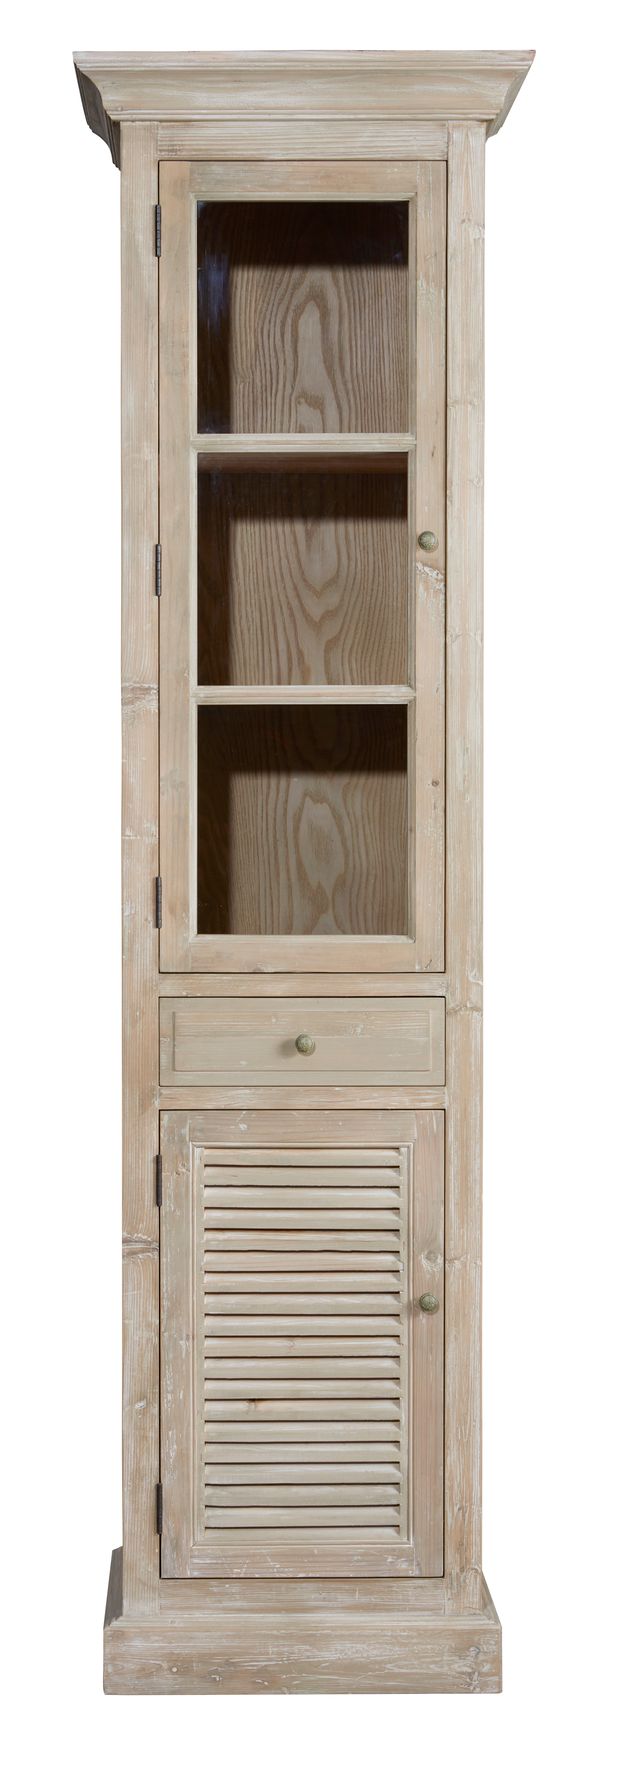 Two-Door Cabinet in Wash Pine Finish with Shutter Front Top